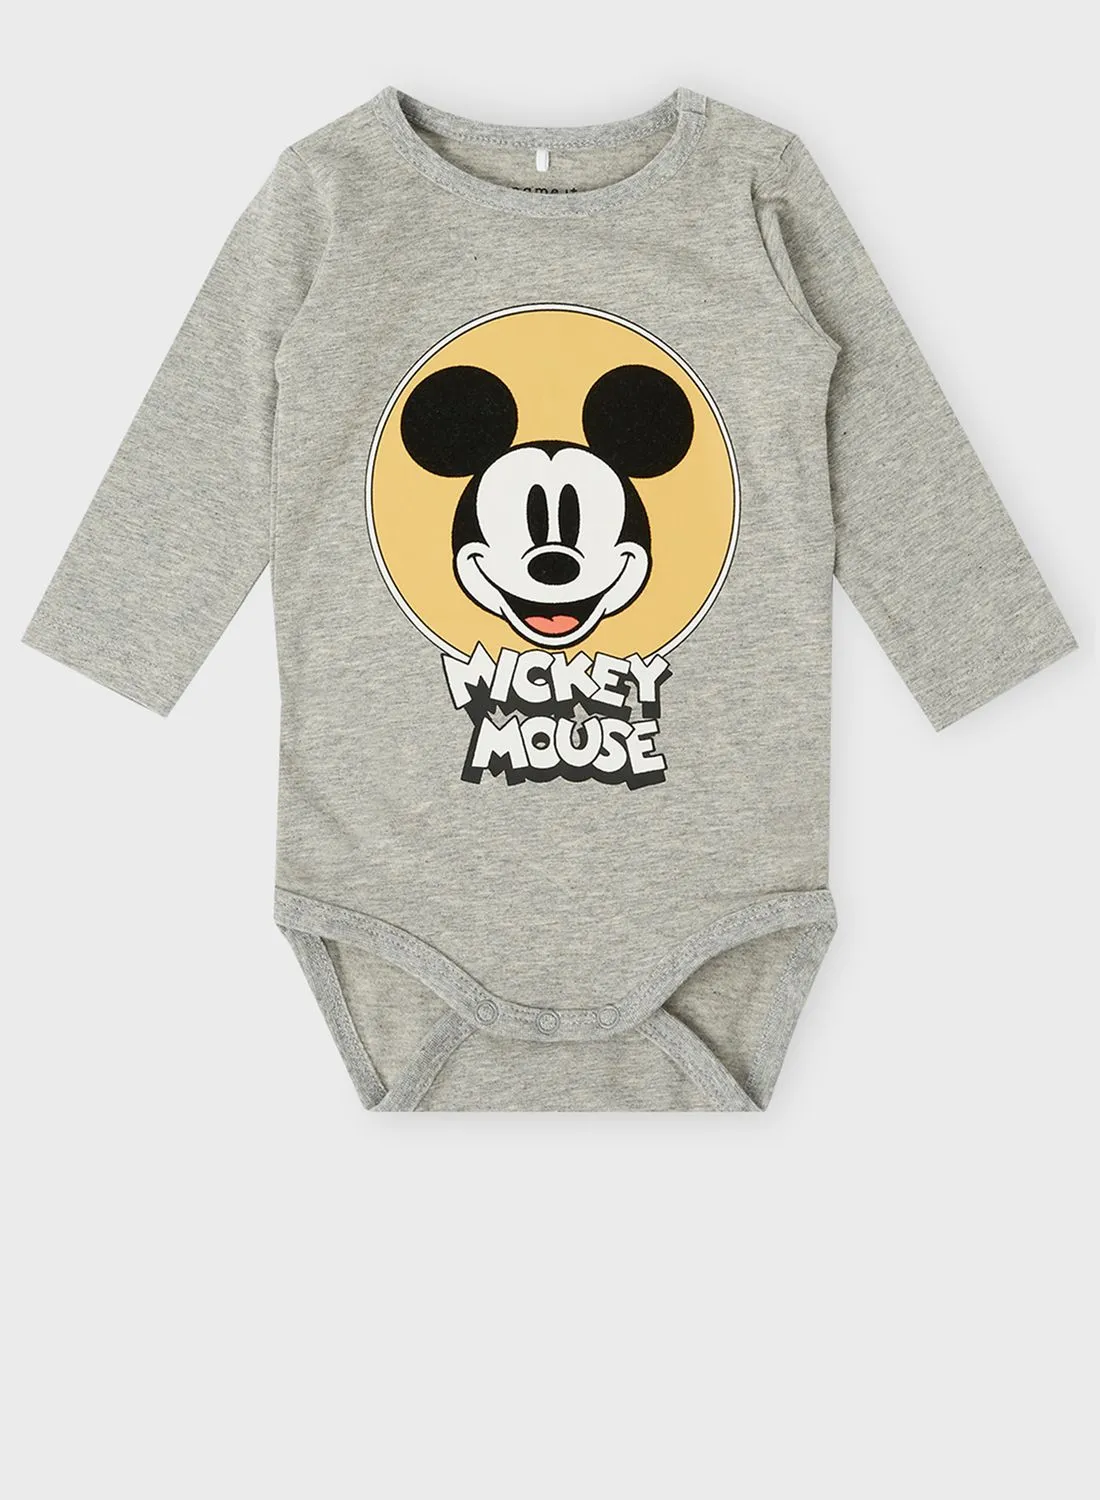 NAME IT Kids Mickey Mouse Onesie